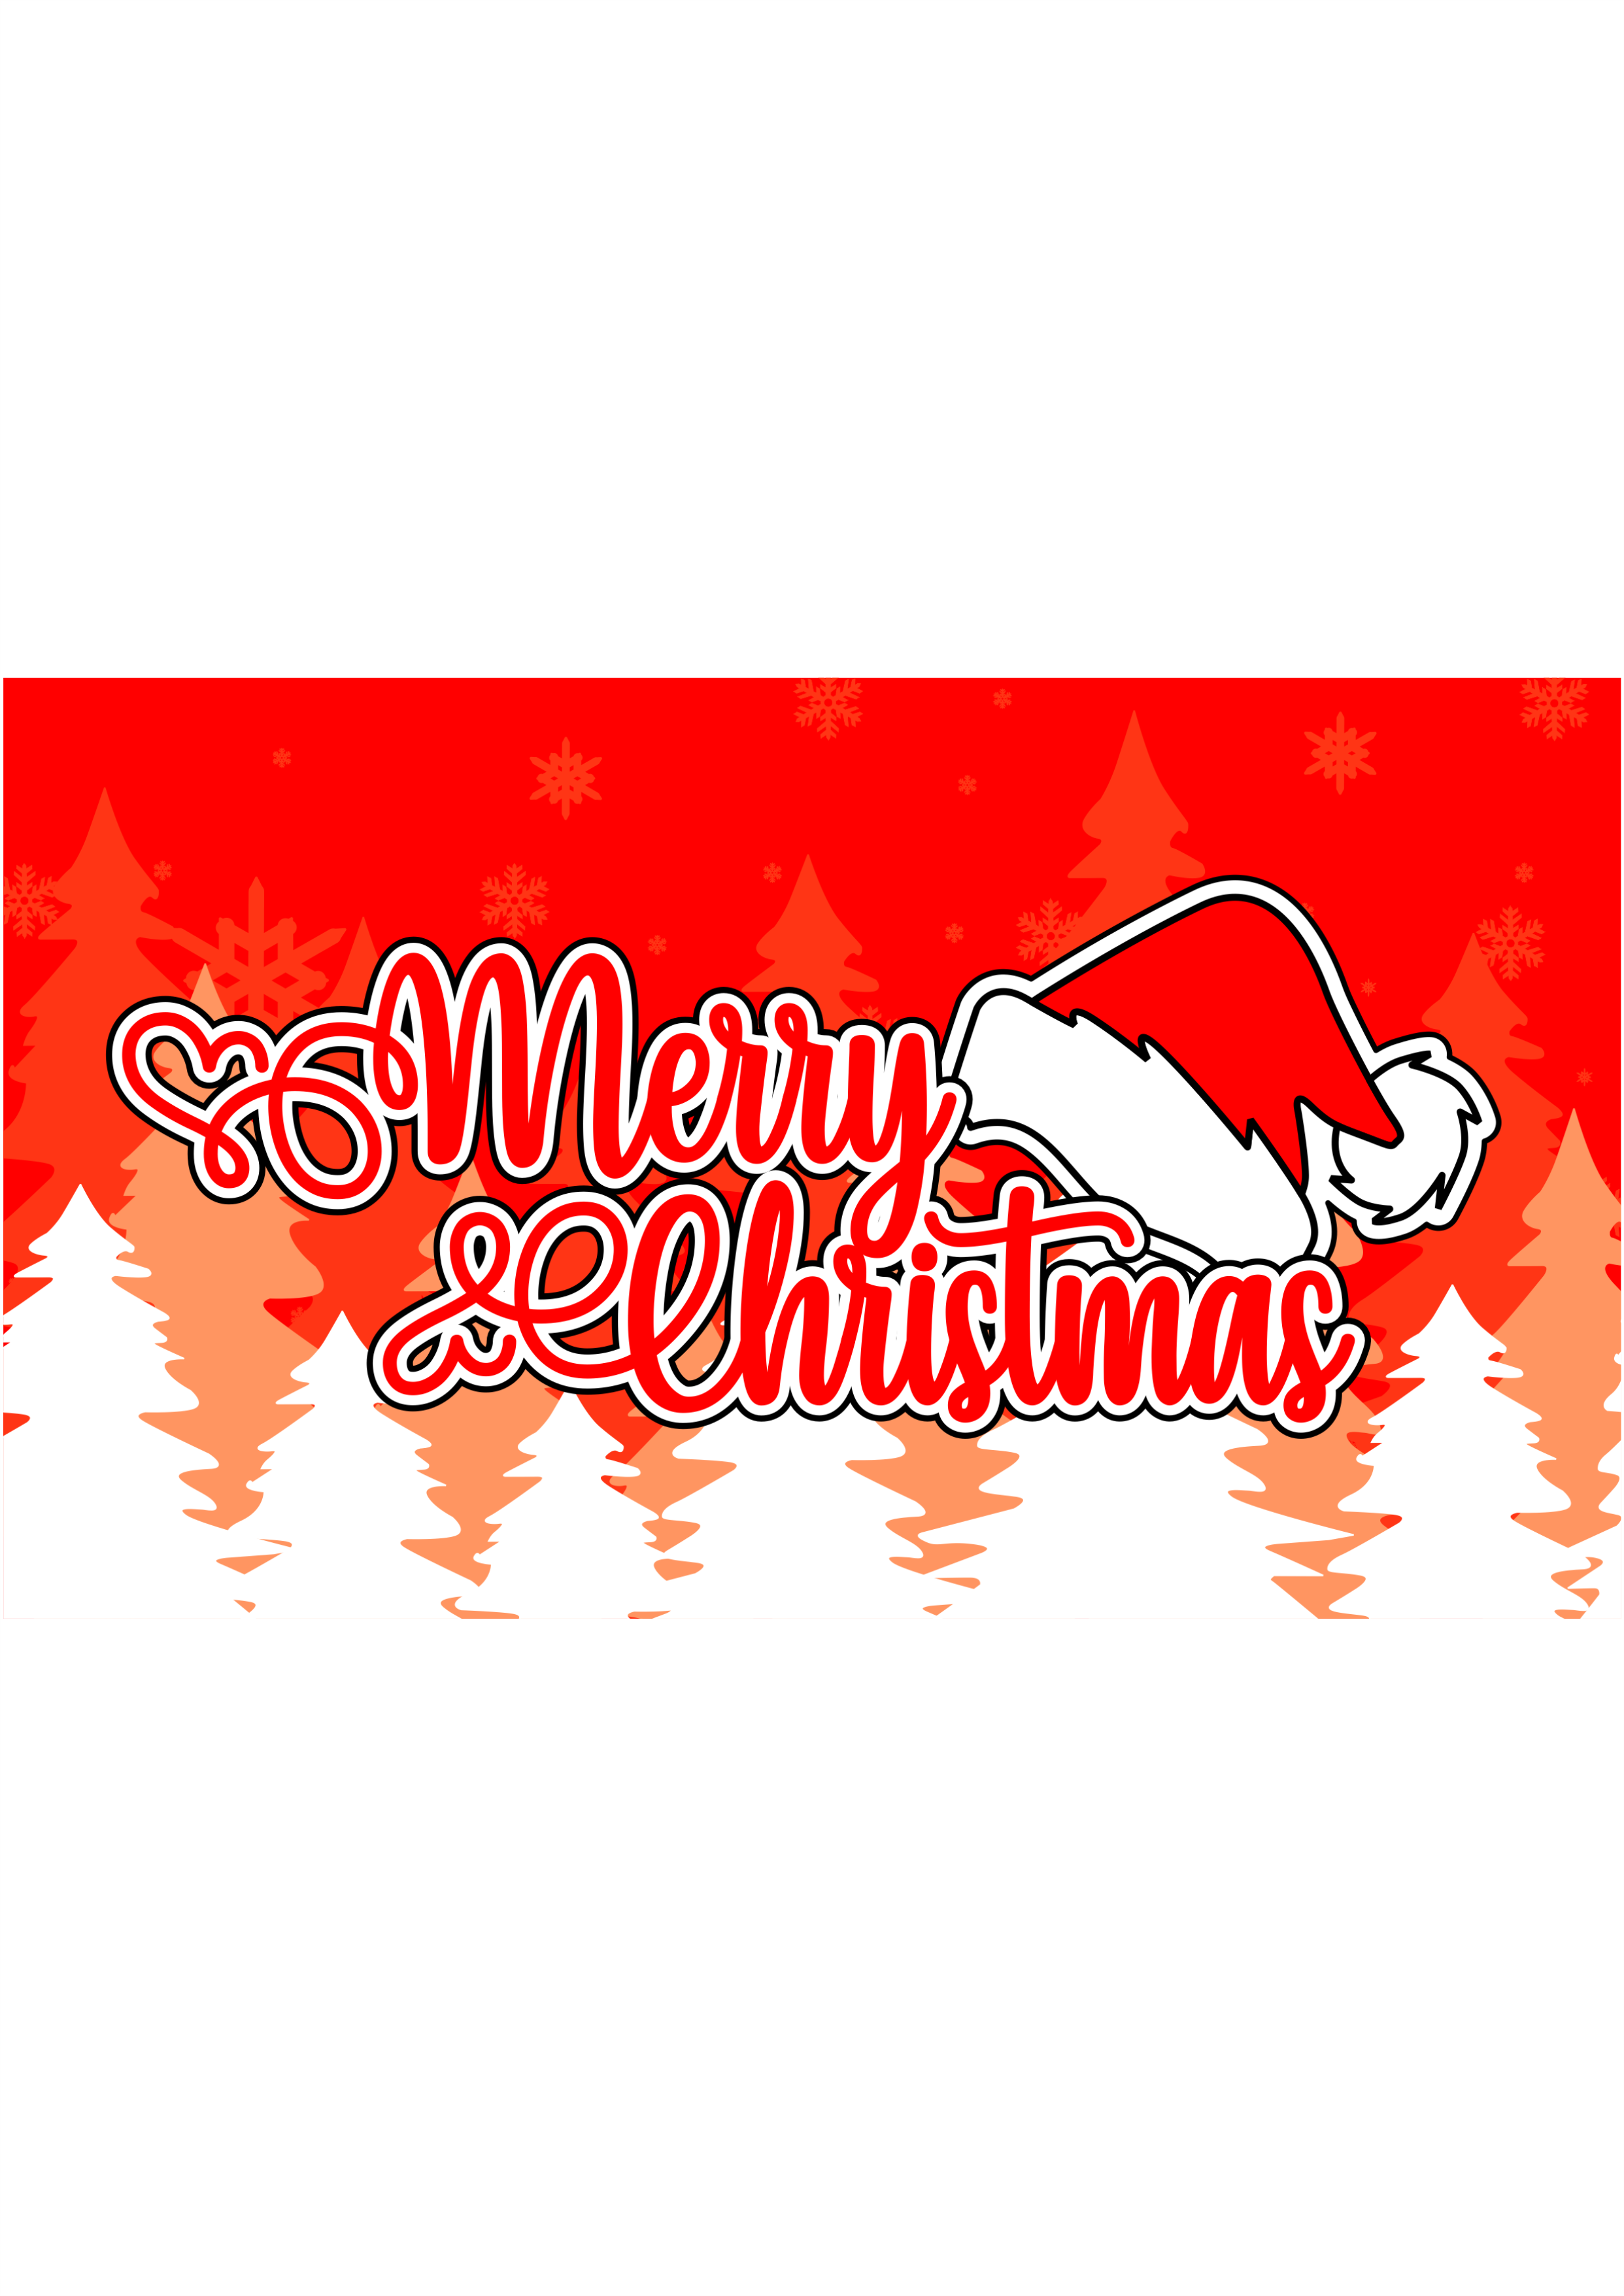 Merry Christmas red wallpaper clipart png